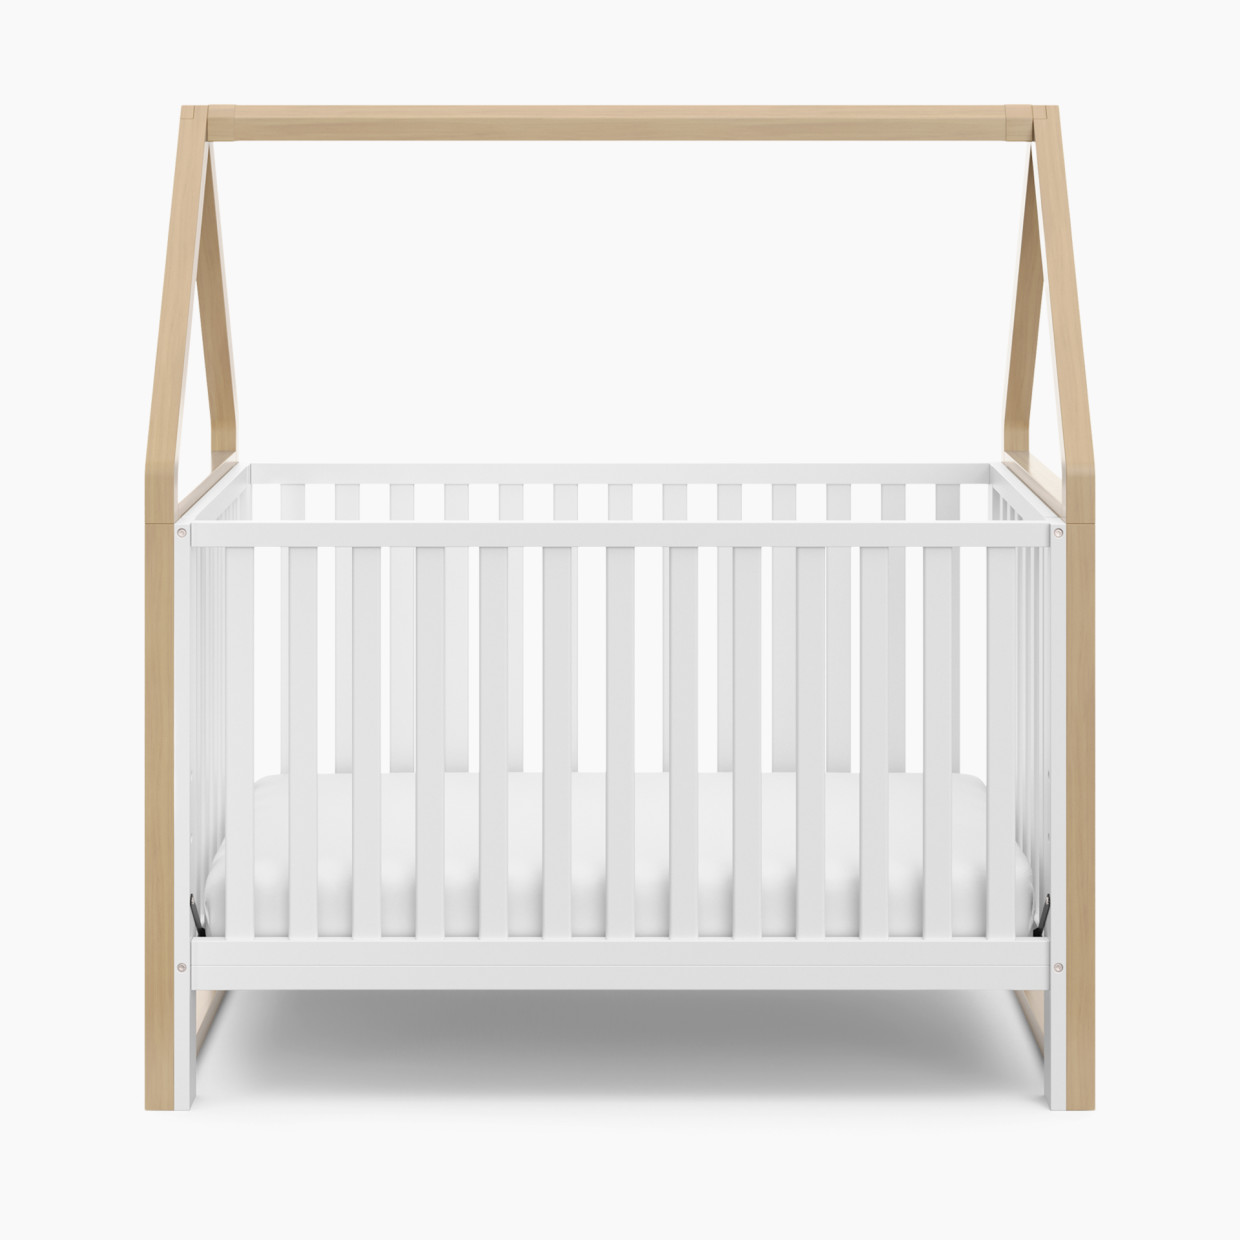 Storkcraft Orchard 5-in-1 Convertible Crib - White/Driftwood.